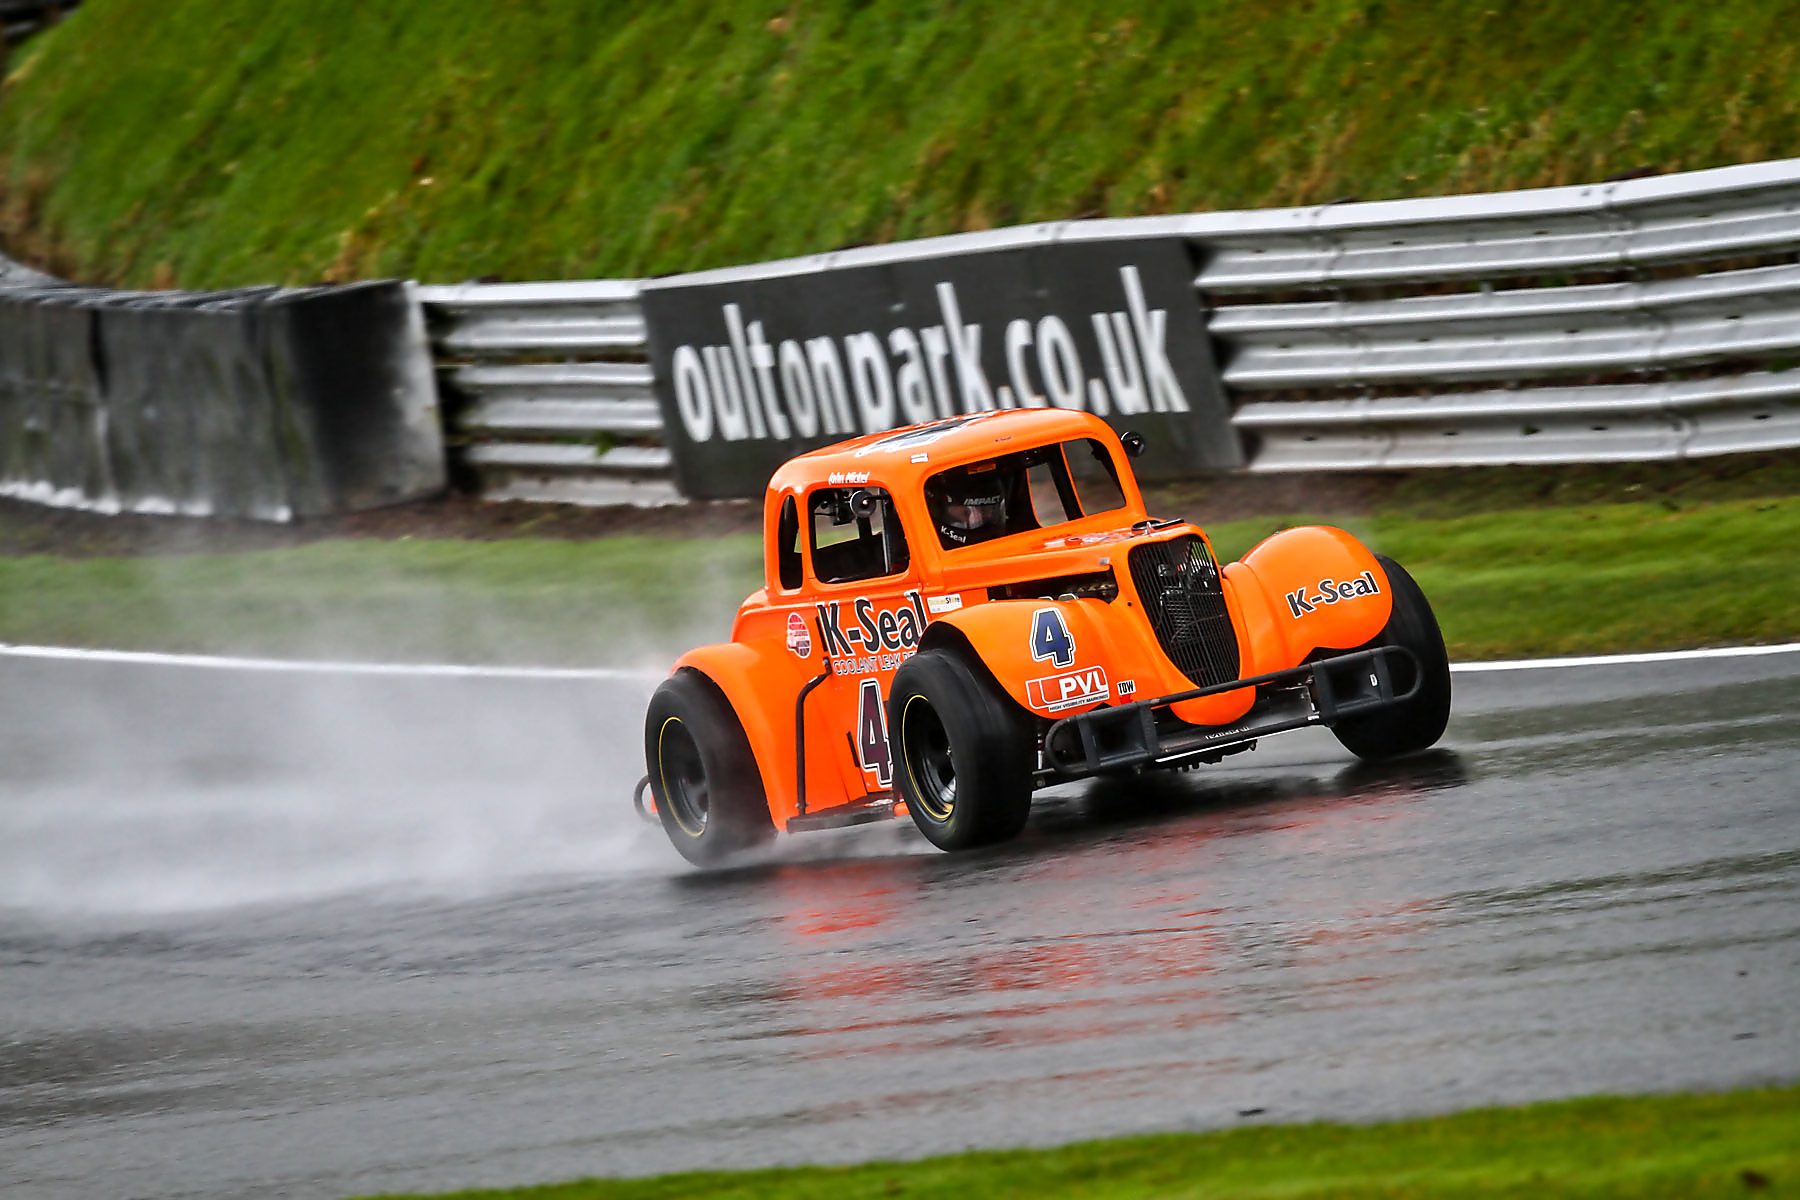 2015 - Round 1 - Oulton Park Gallery Image 23